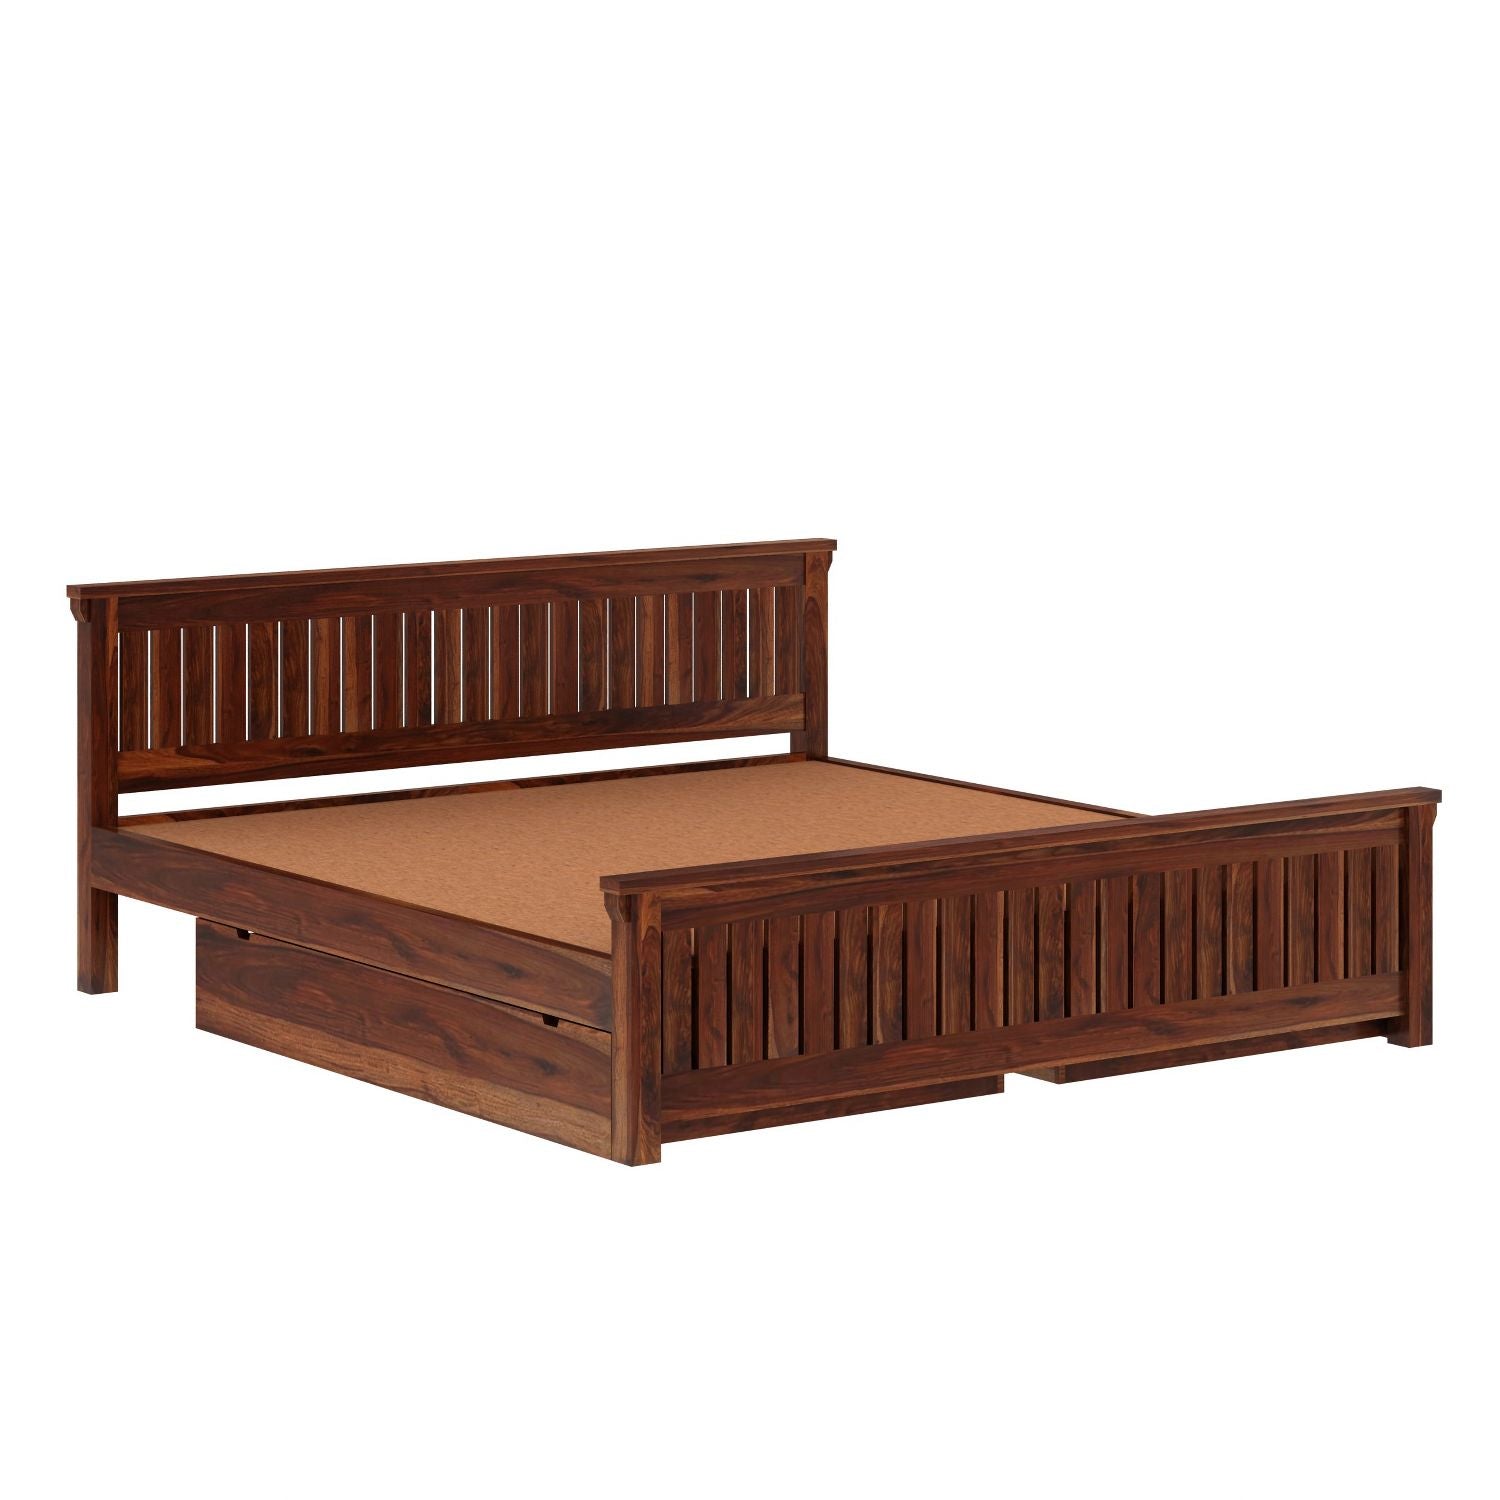 Trinity Solid Sheesham Wood Bed With Two Drawers (King Size, Natural Finish)